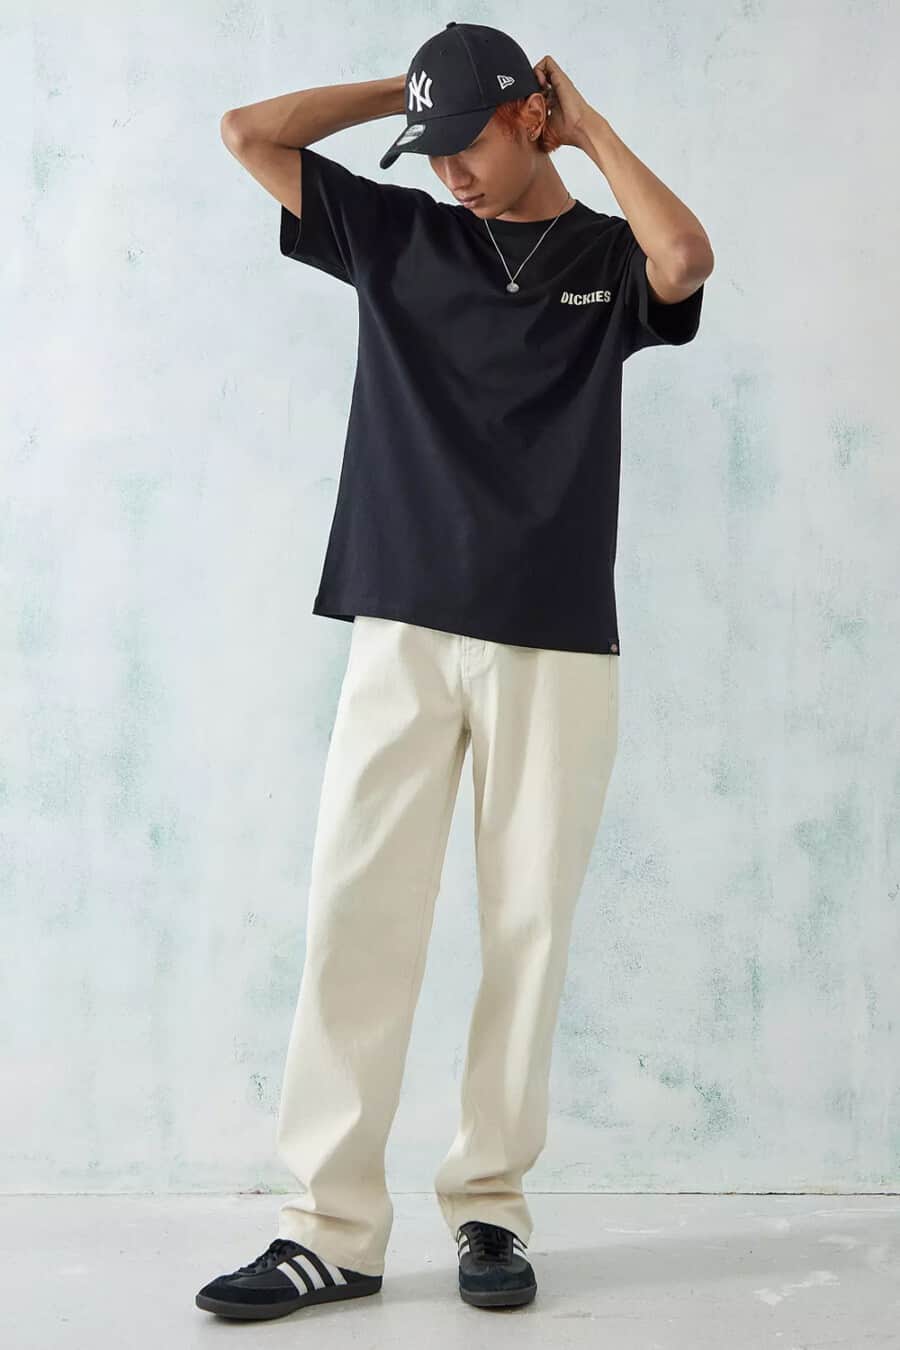 Men's baggy off-white jeans, black Dickies T-shirt, black NY Era baseball cap and black adidas Samba sneakers with pendant chain outfit